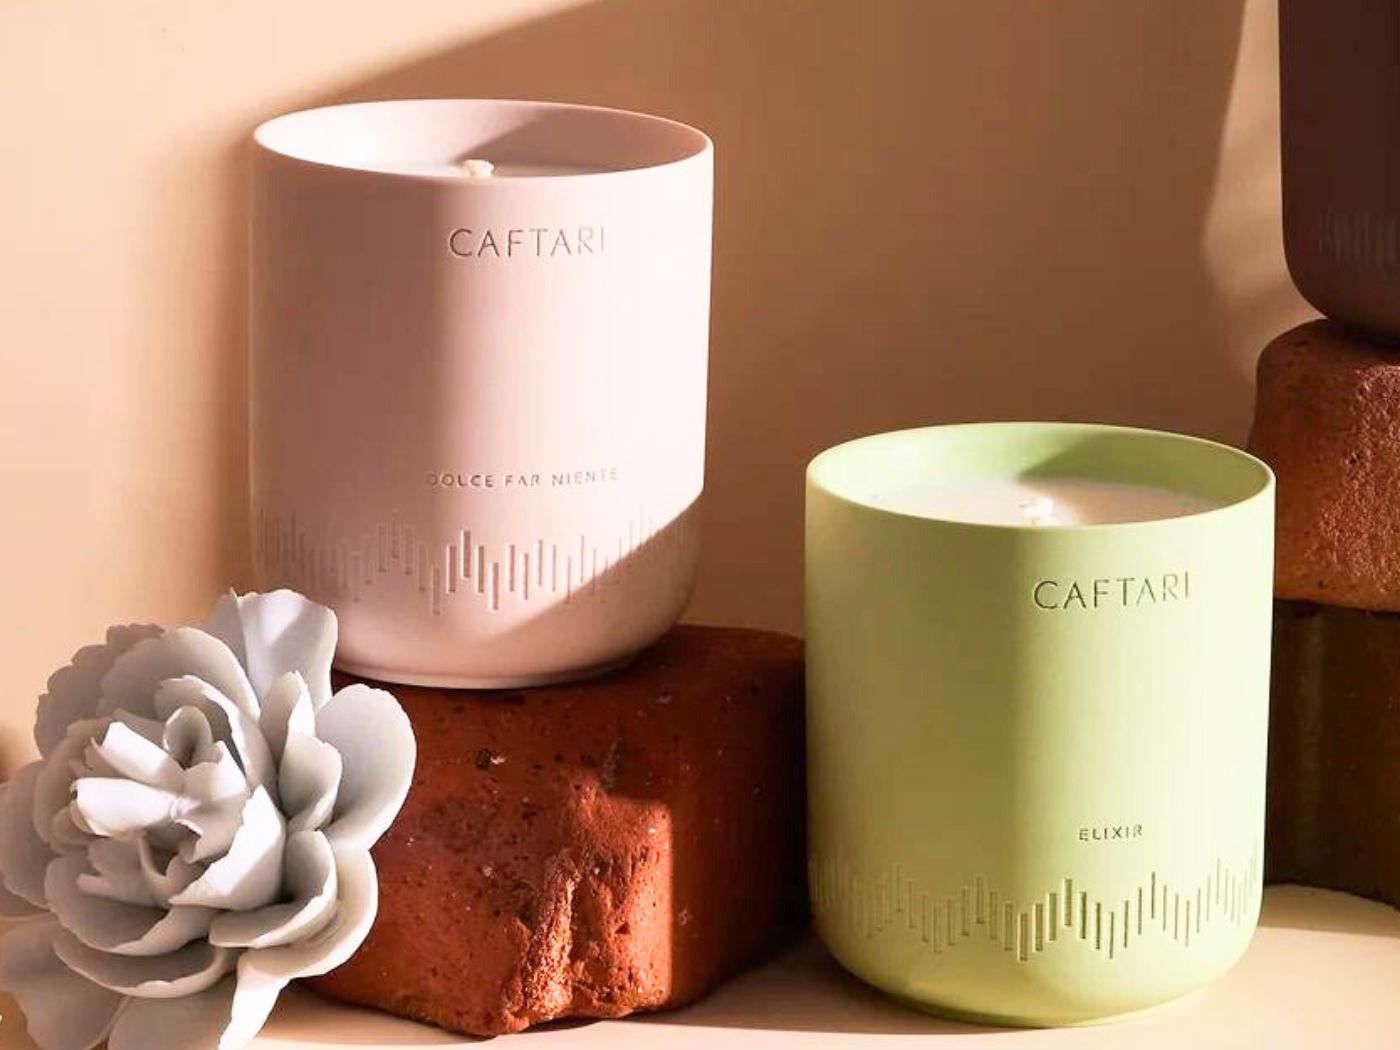 Two votive candles, pale pink and soft green, are displayed with red rocks and a white ceramic flower.